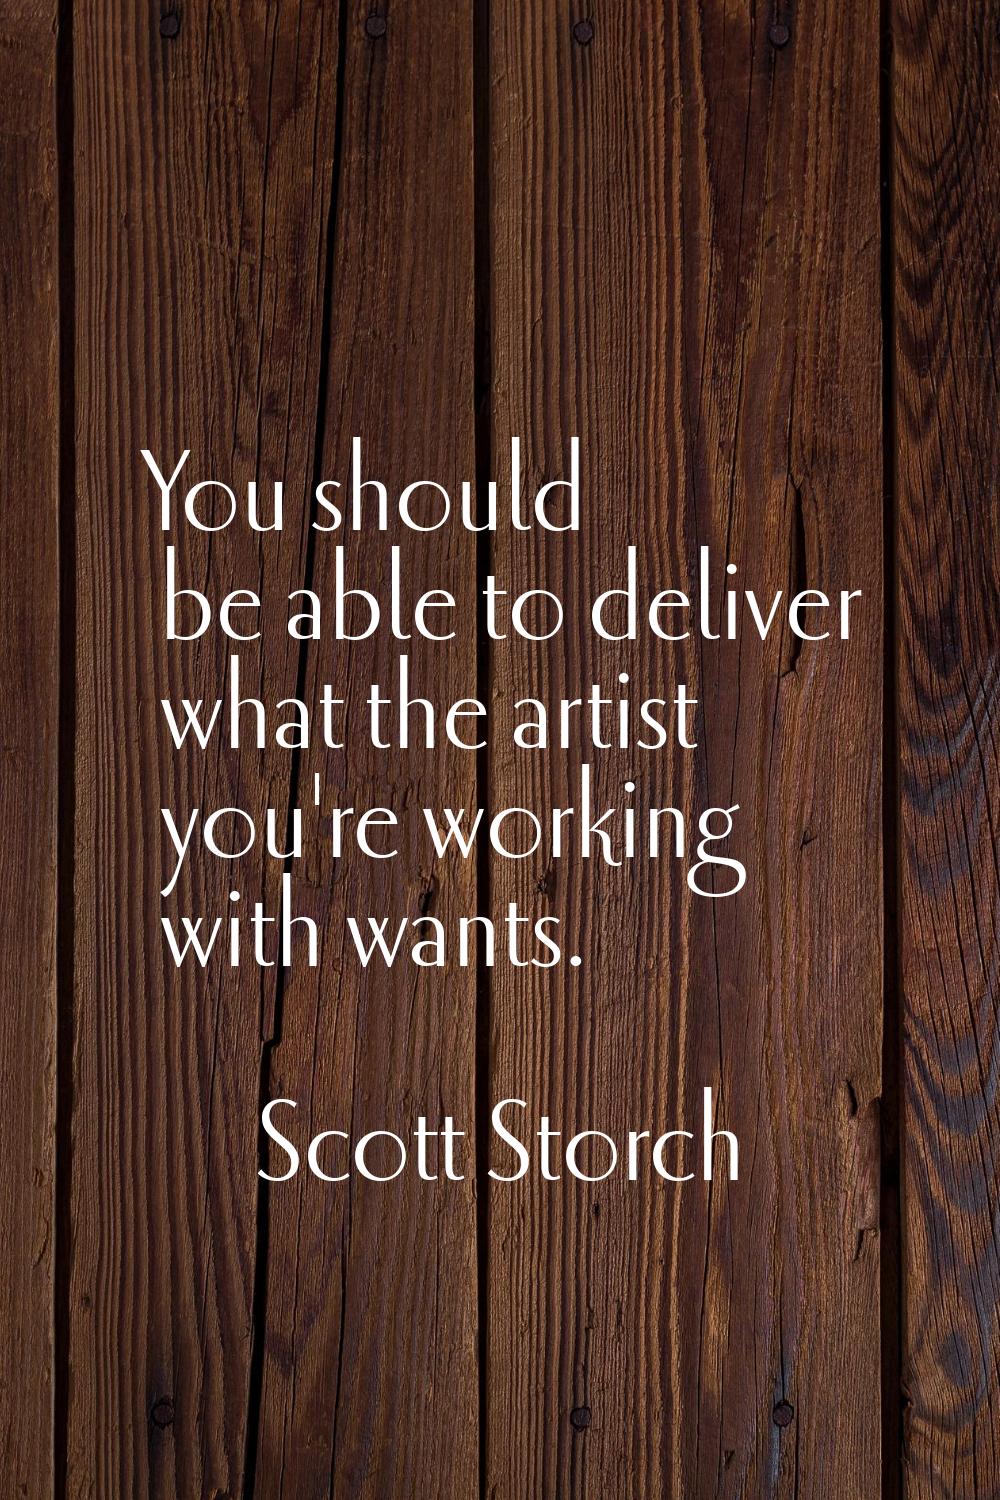 You should be able to deliver what the artist you're working with wants.